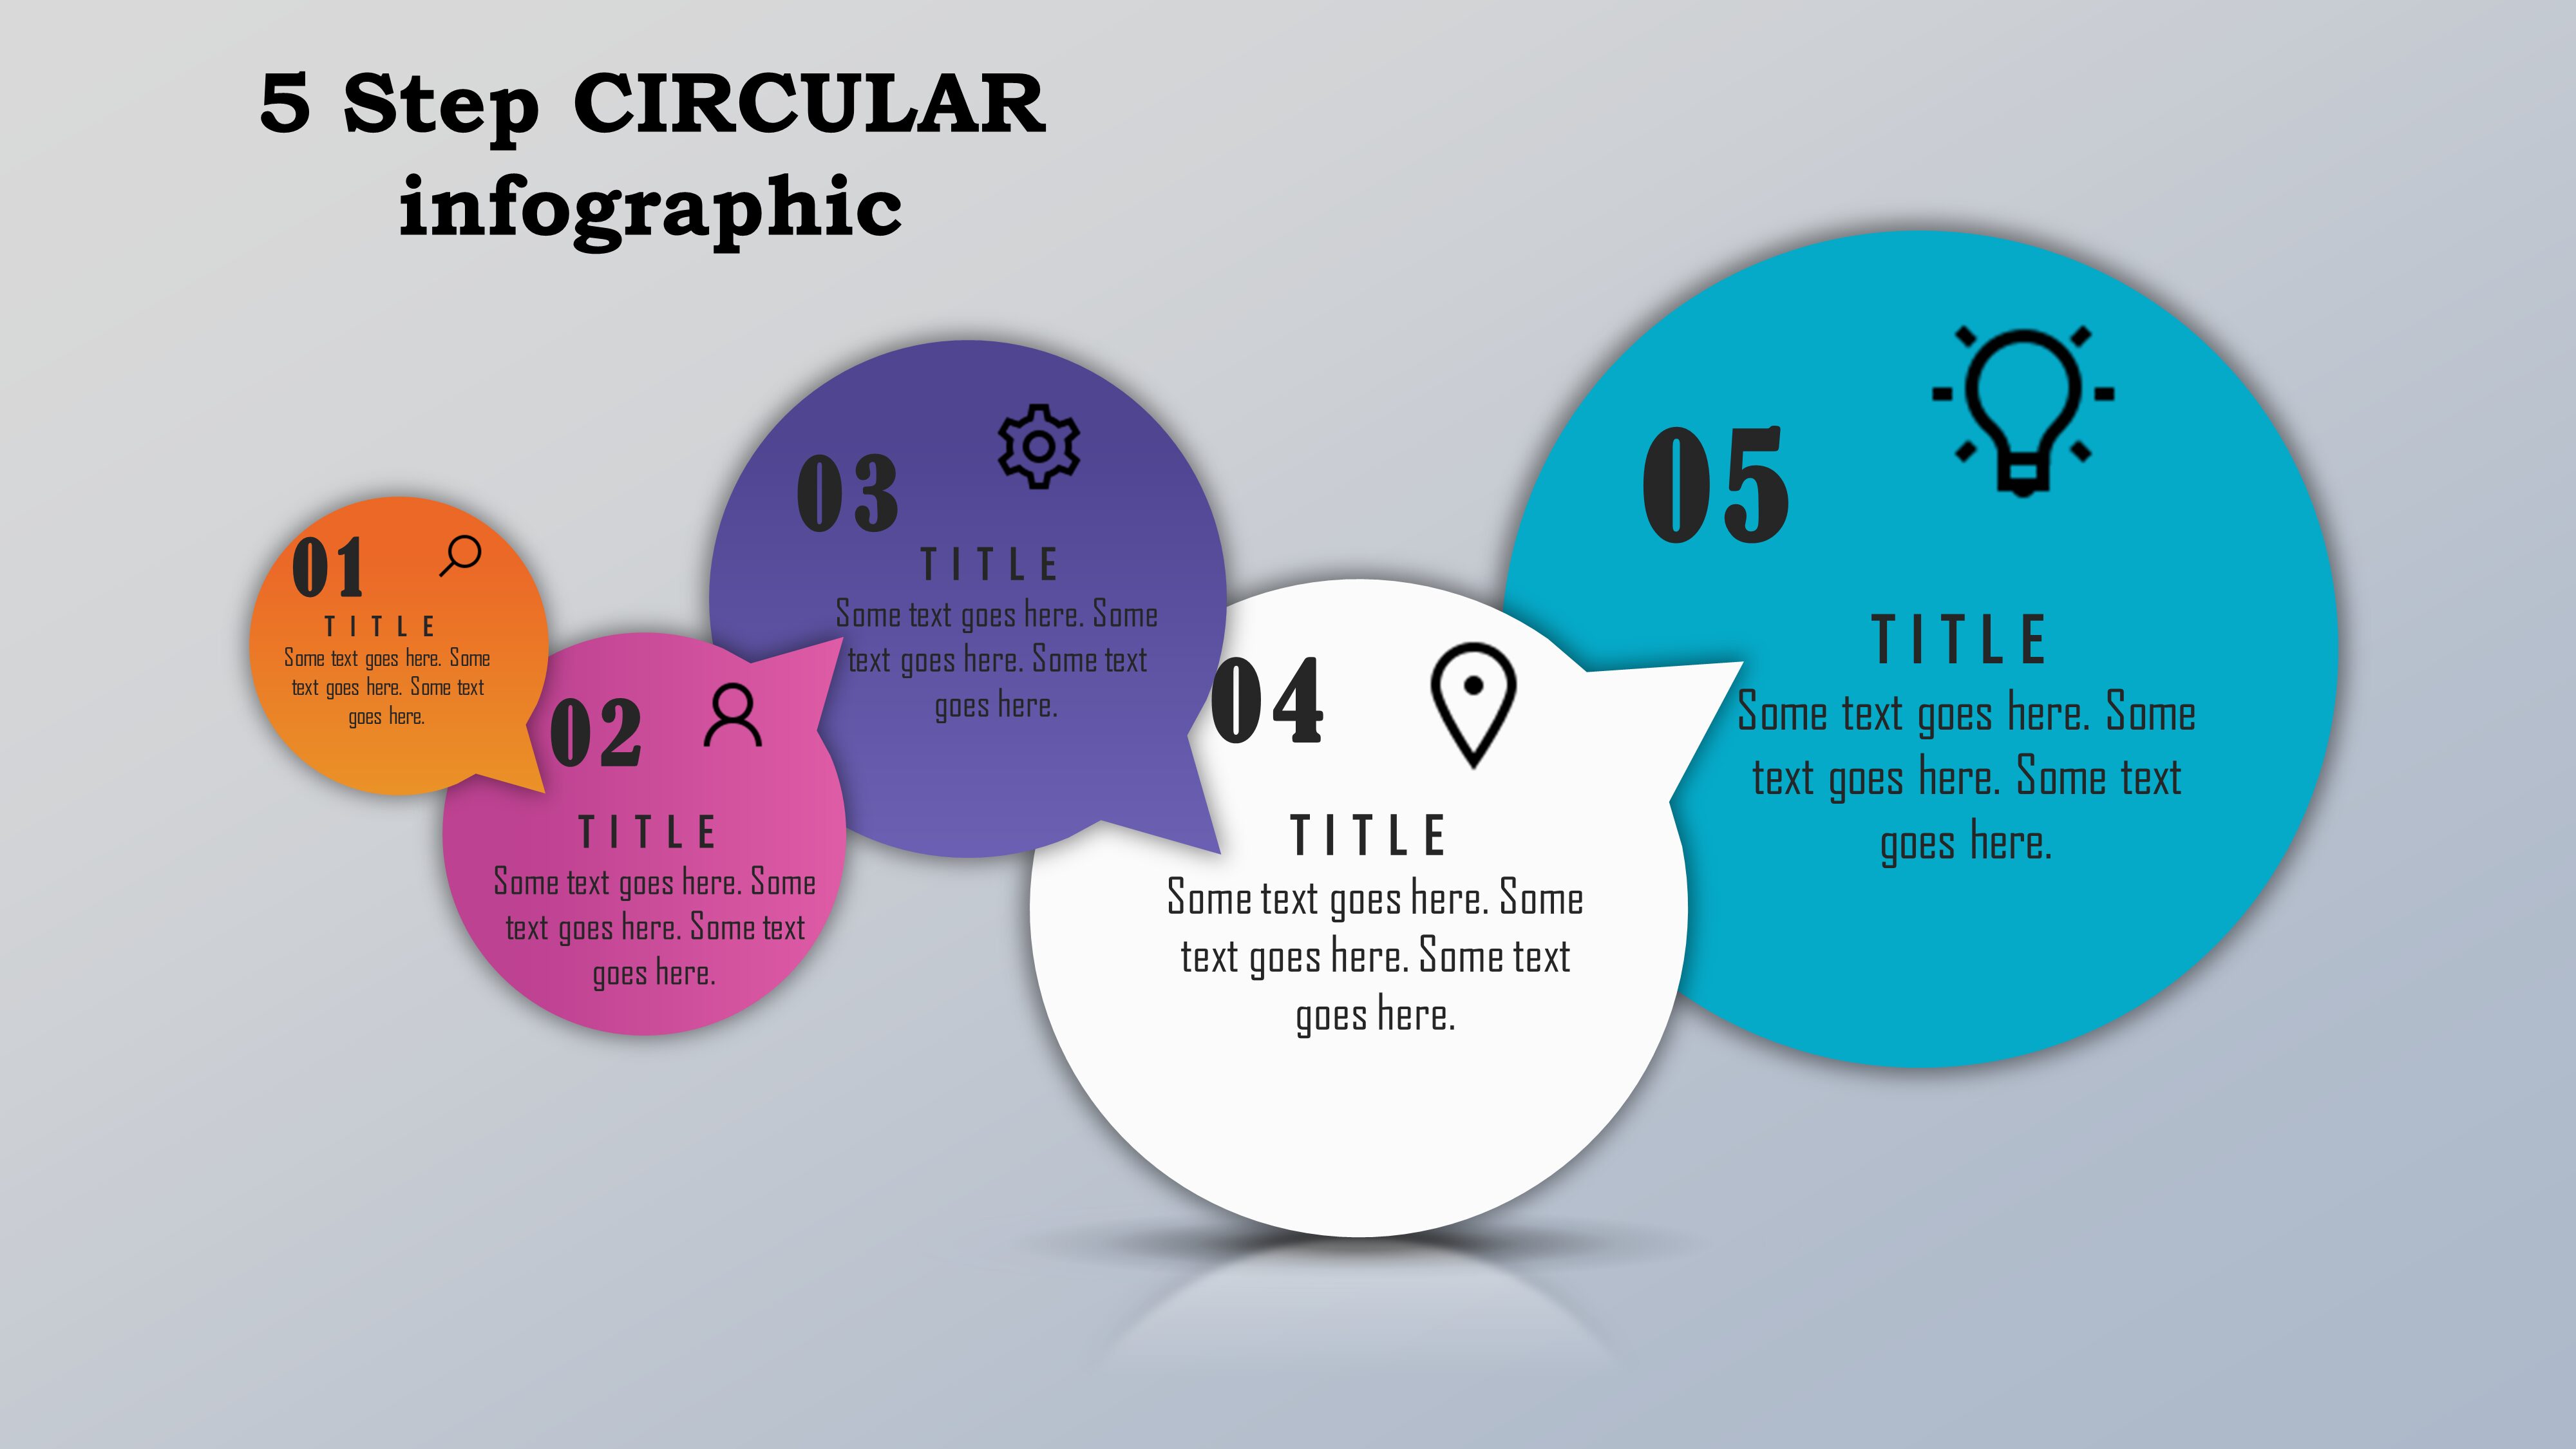 17powerpoint 5 Step Circular Infographic Powerup With Powerpoint 5099